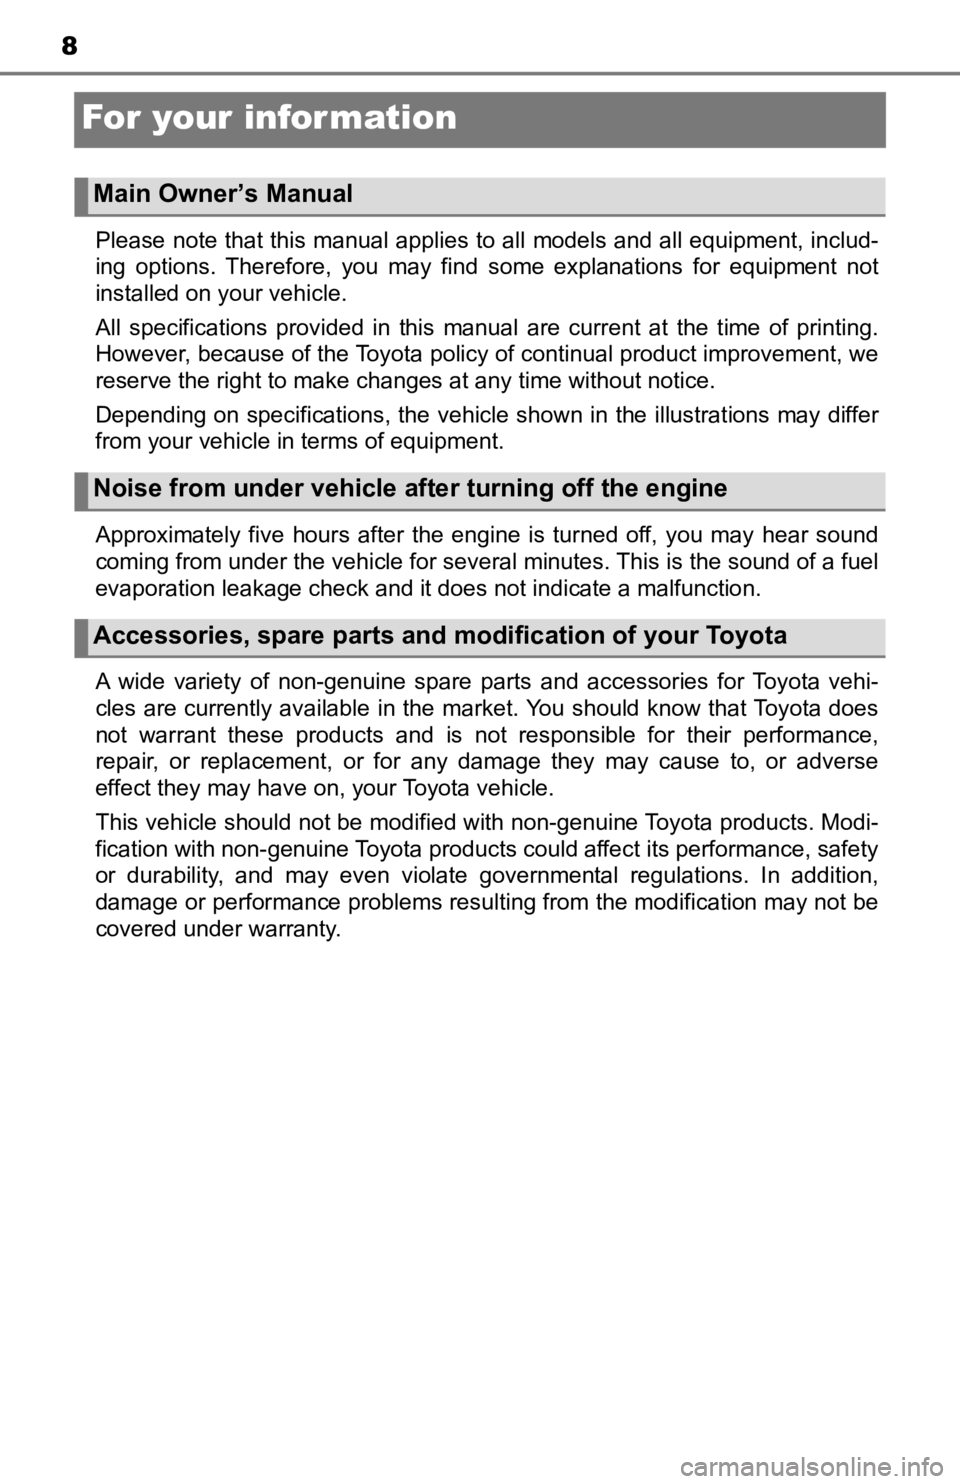 TOYOTA TACOMA 2019  Owners Manual (in English) 8
For your infor mation
Please note that this manual applies to all models and all equipment, includ-
ing  options.  Therefore,  you  may  find  some  explanations  for  equi pment  not
installed on y